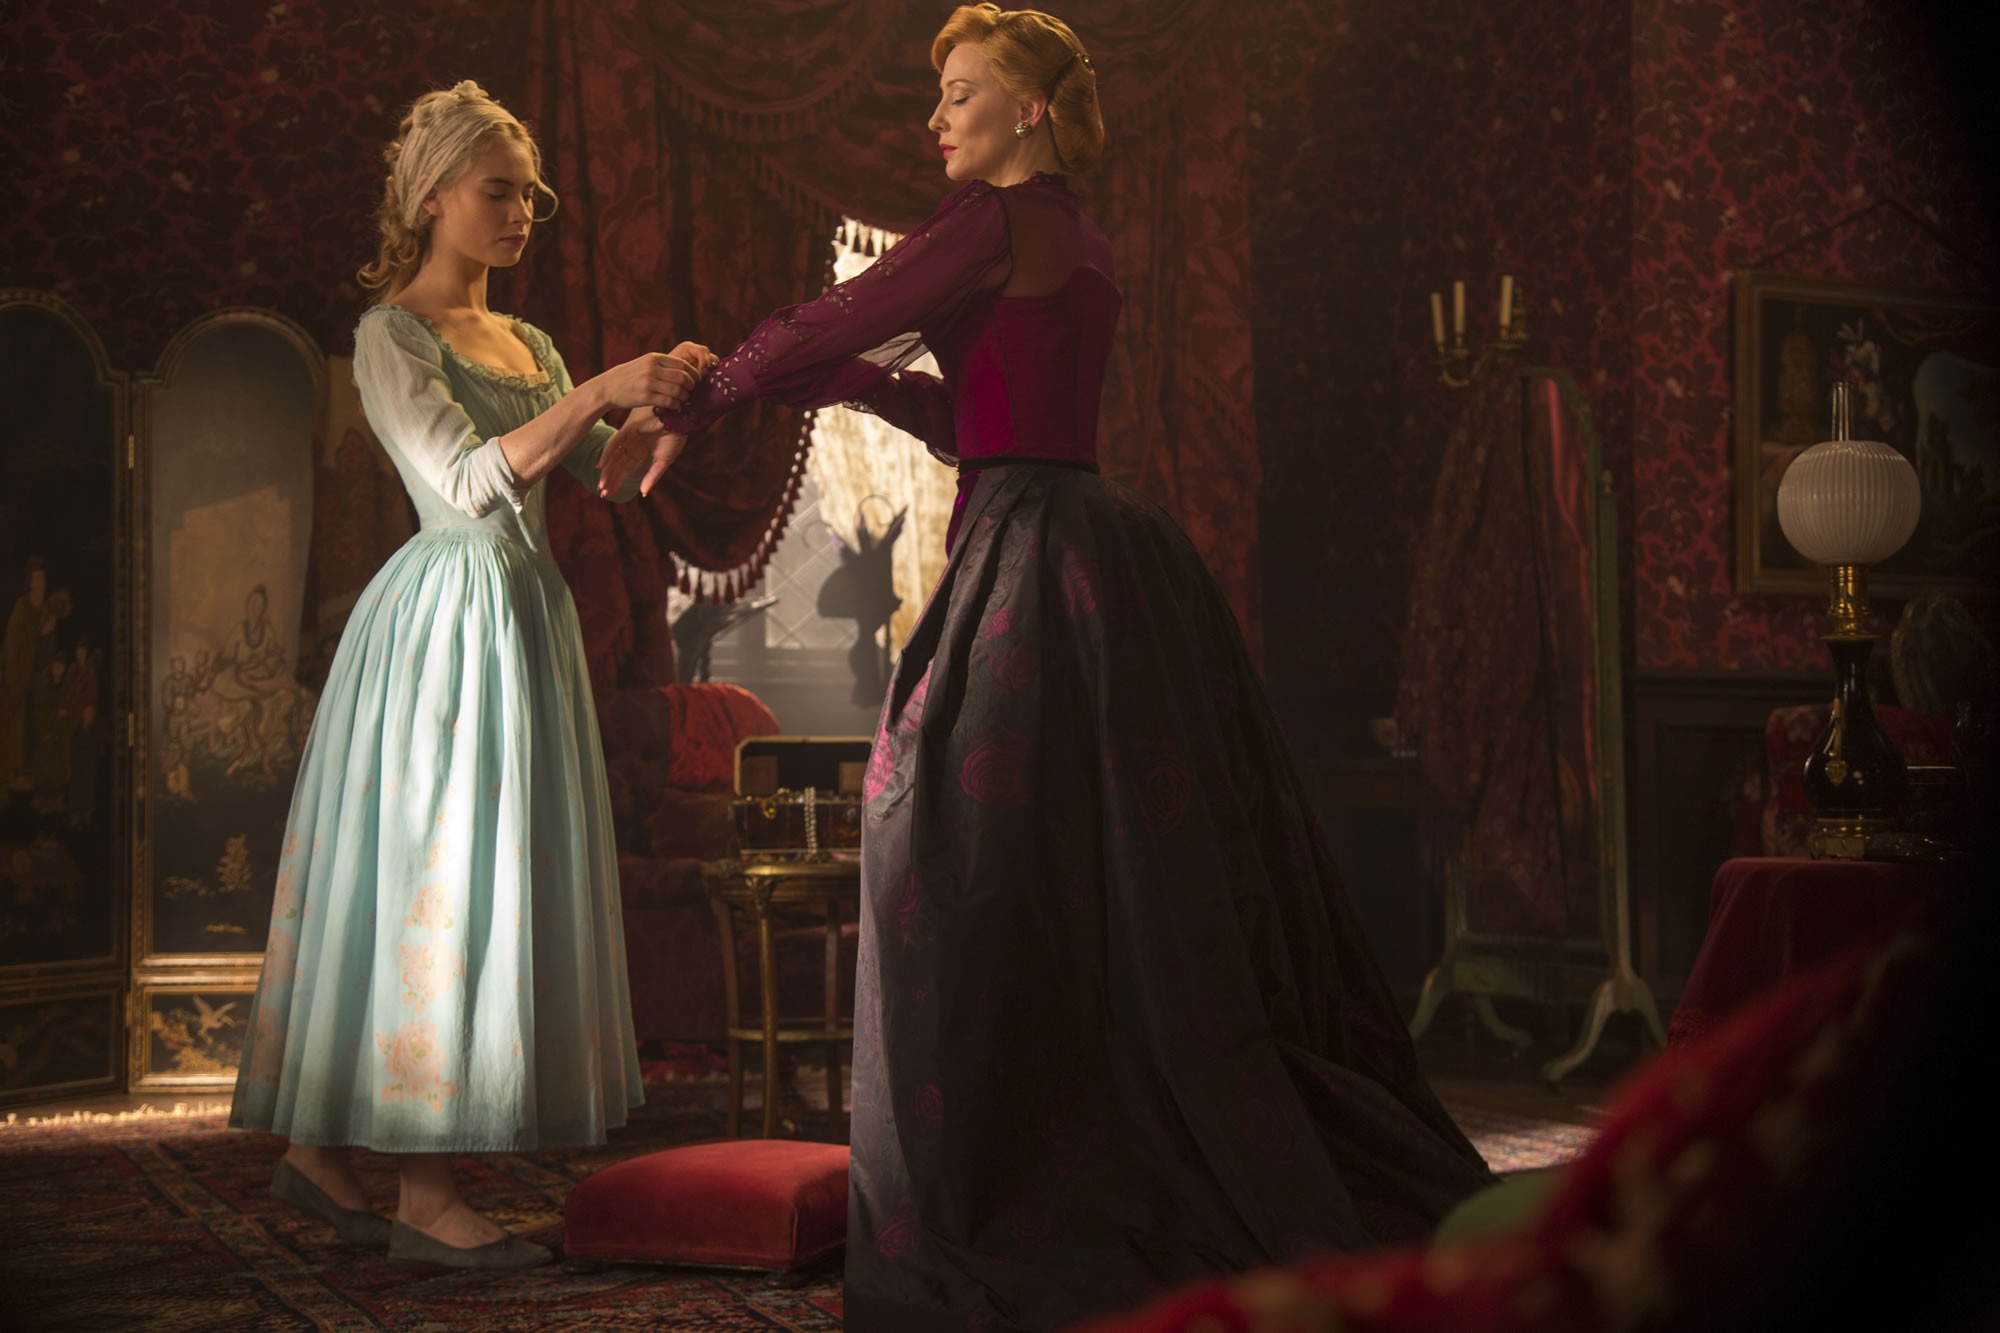 Lily James stars as Cinderella and Cate Blanchett stars as Lady Tremaine in Walt Disney Pictures' Cinderella (2015). Photo credit by Jonathan Olley.